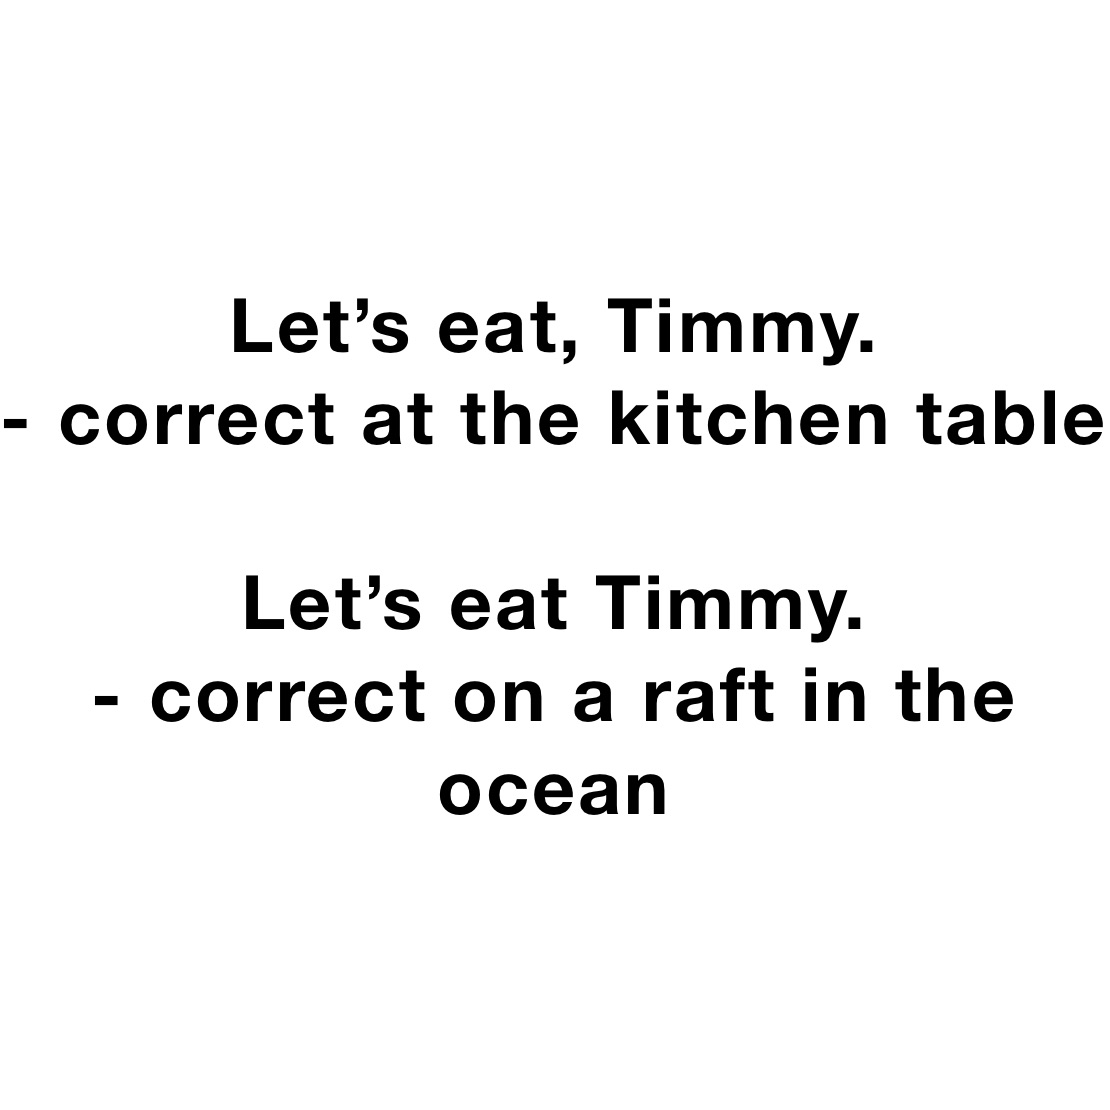 Let’s eat, Timmy.
- correct at the kitchen table

Let’s eat Timmy. 
- correct on a raft in the ocean